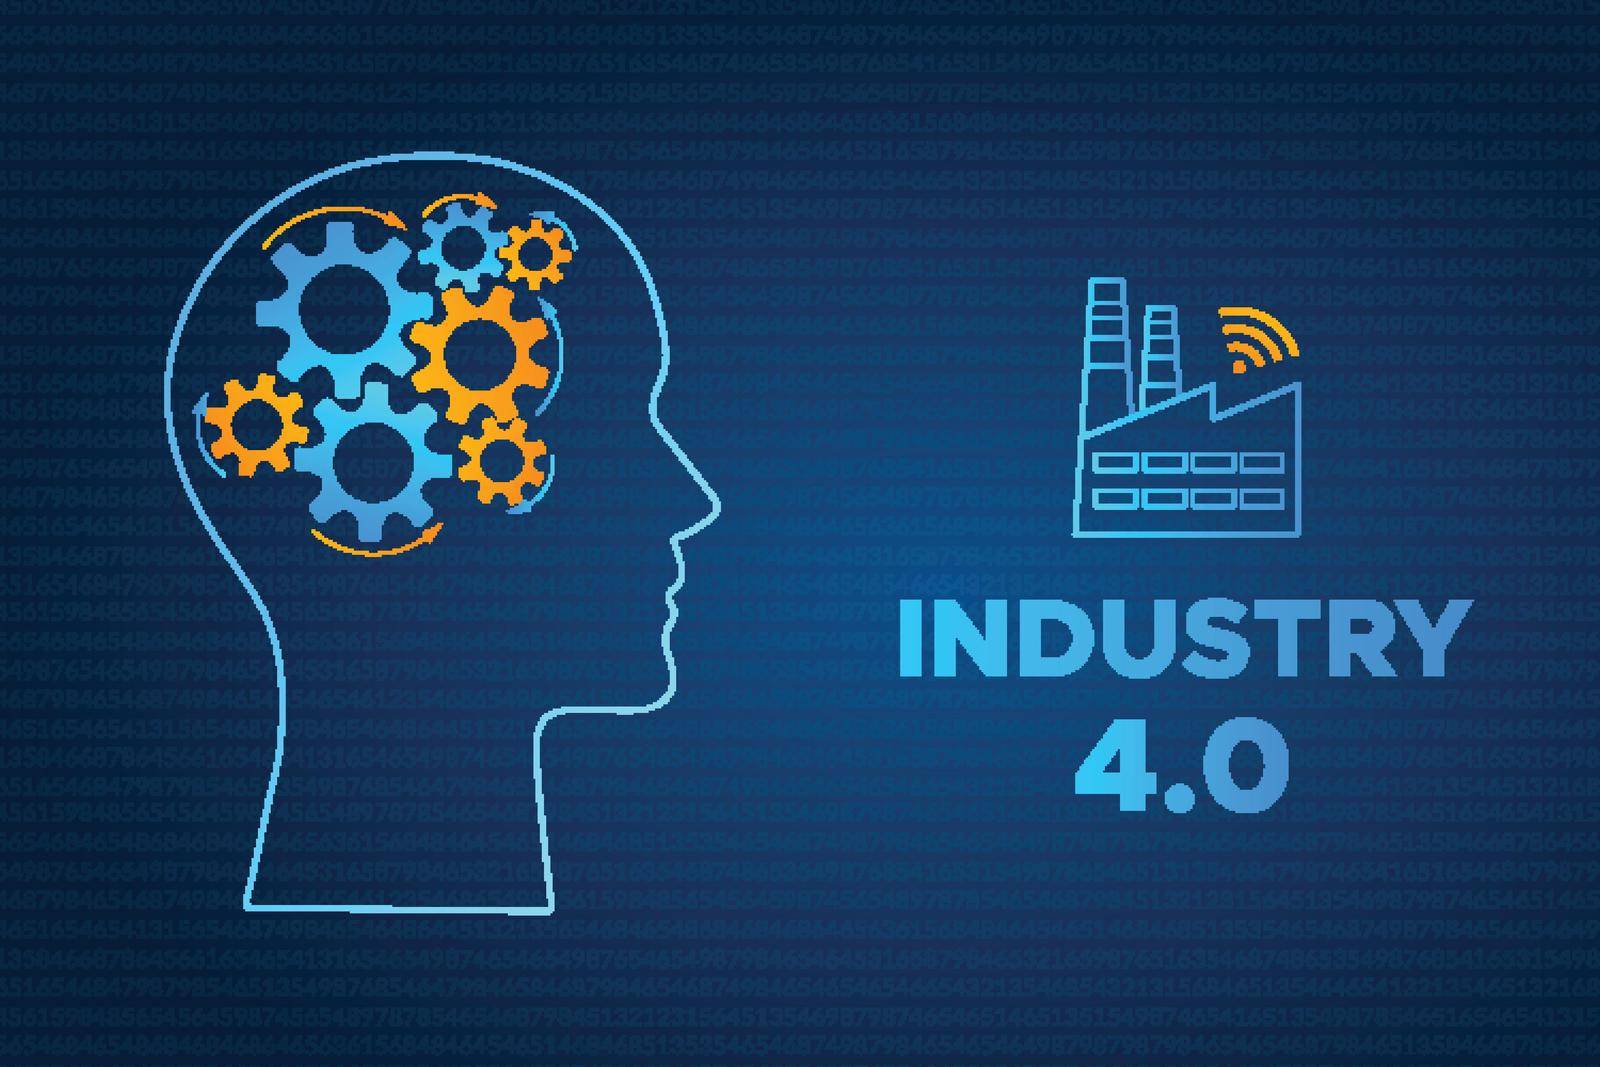 Head profile industry 4.0 revolution concept vector illustration. Blue factory icon with wireless symbol and sign INDUSTRY 4.0 Head silhouette with gear brain technology revolution business concept.